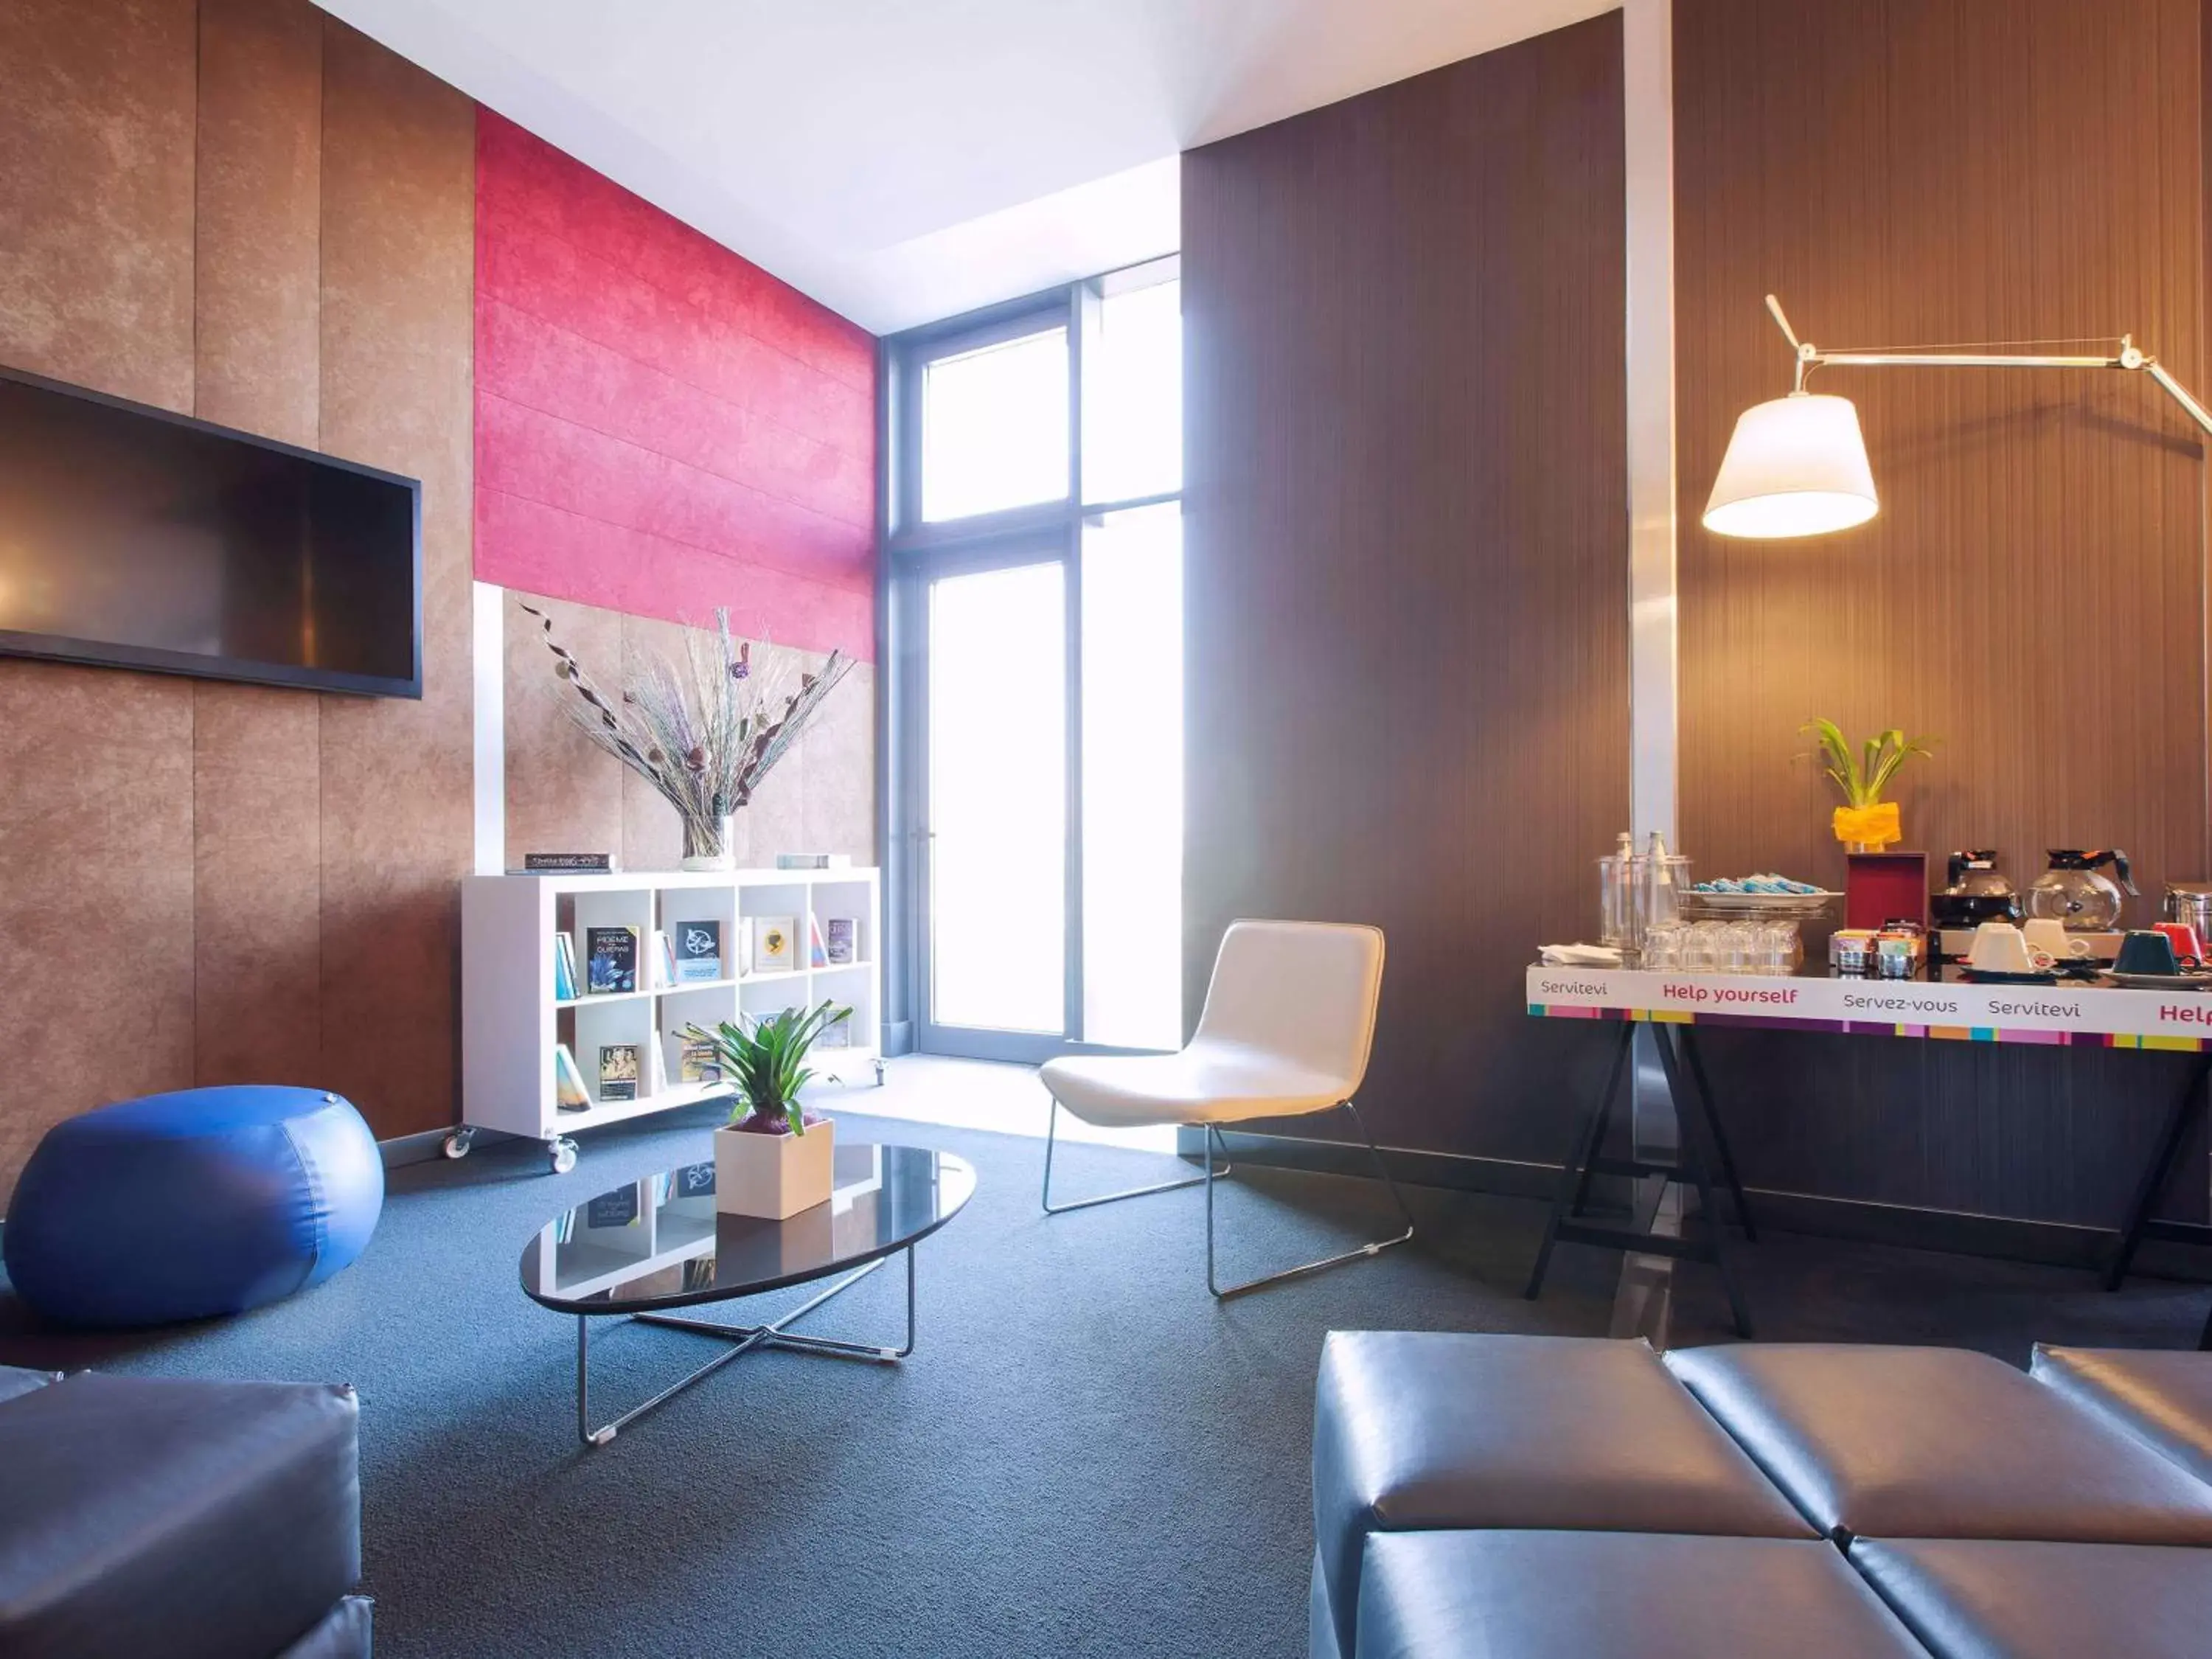 Property building in Ibis Styles Roma Eur